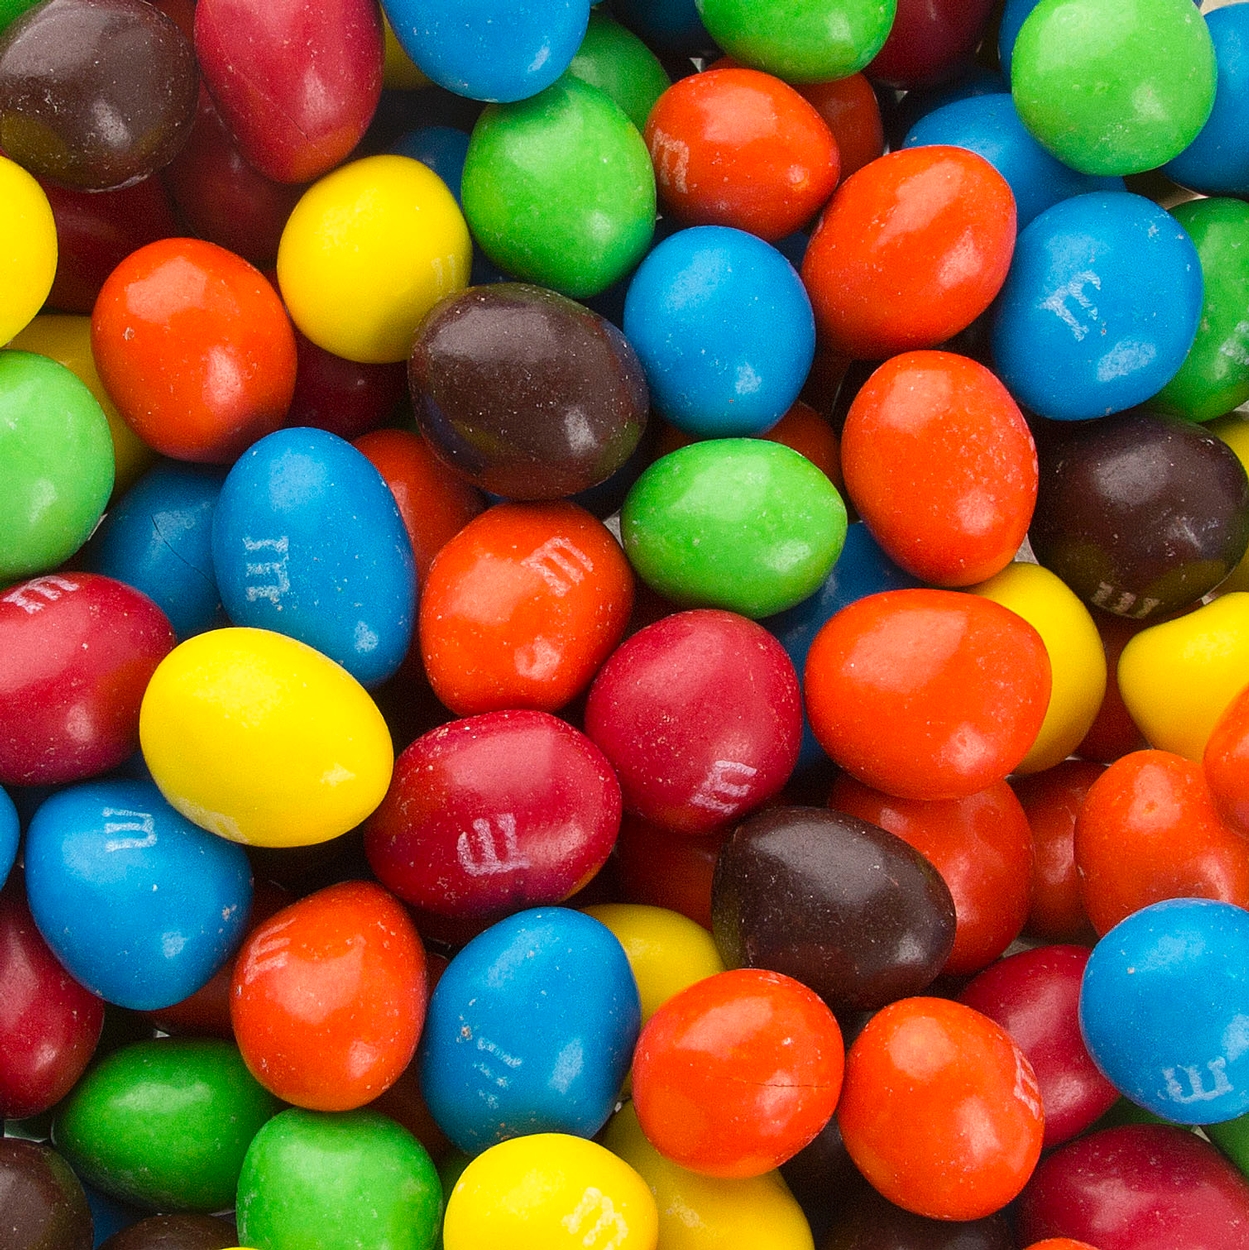 Assorted Milk Chocolate M&M's Candy (1 Pound Bag)